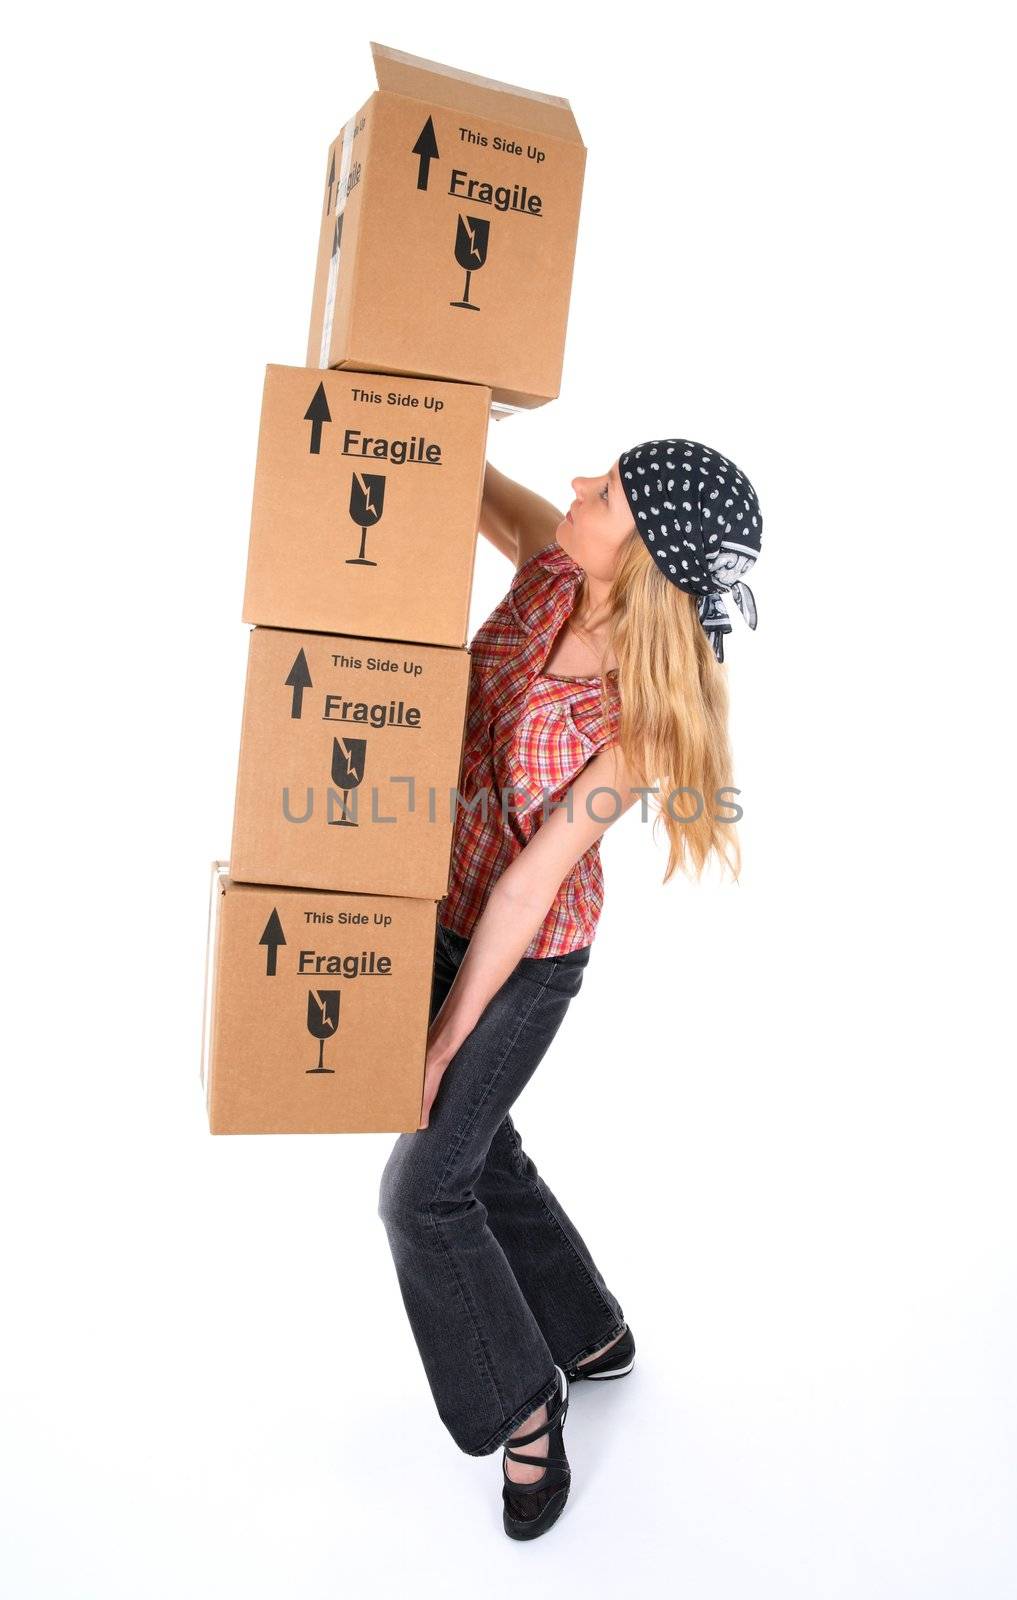 Woman balancing with a stack of cardboard boxes, ready to fall.